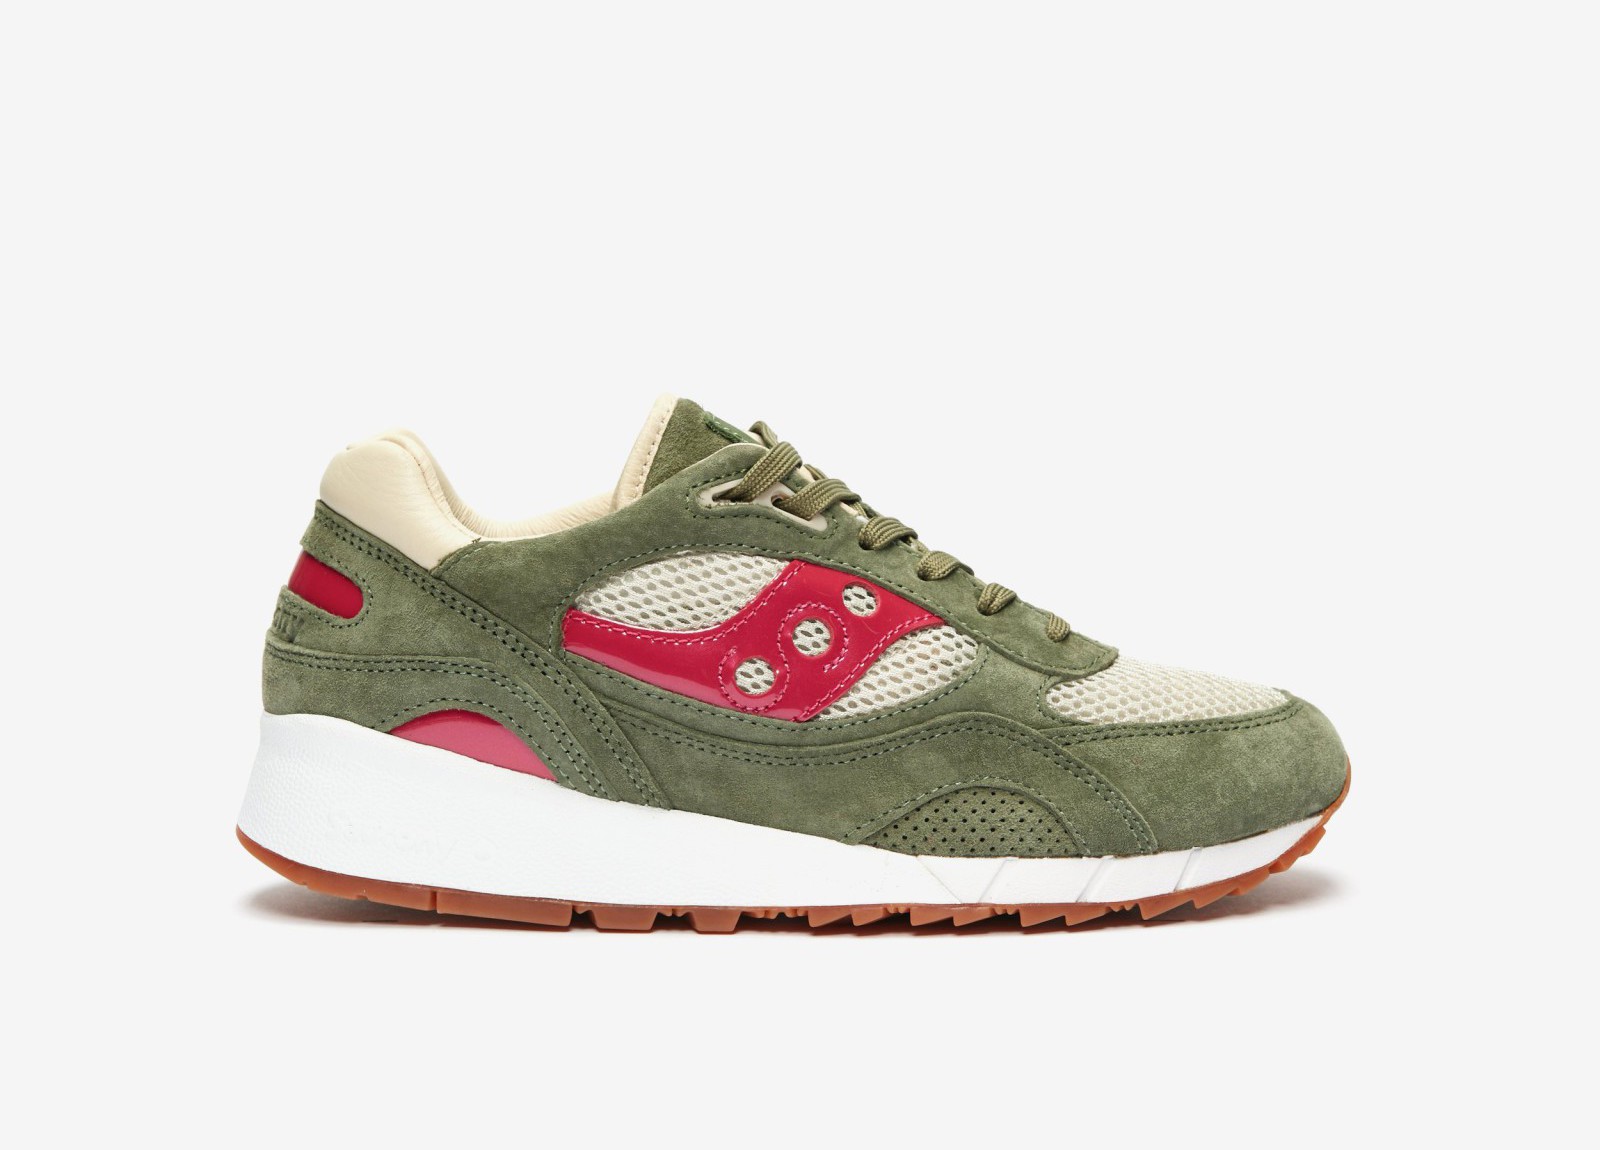 Saucony x Up There
Shadow 6000
Doors To The World